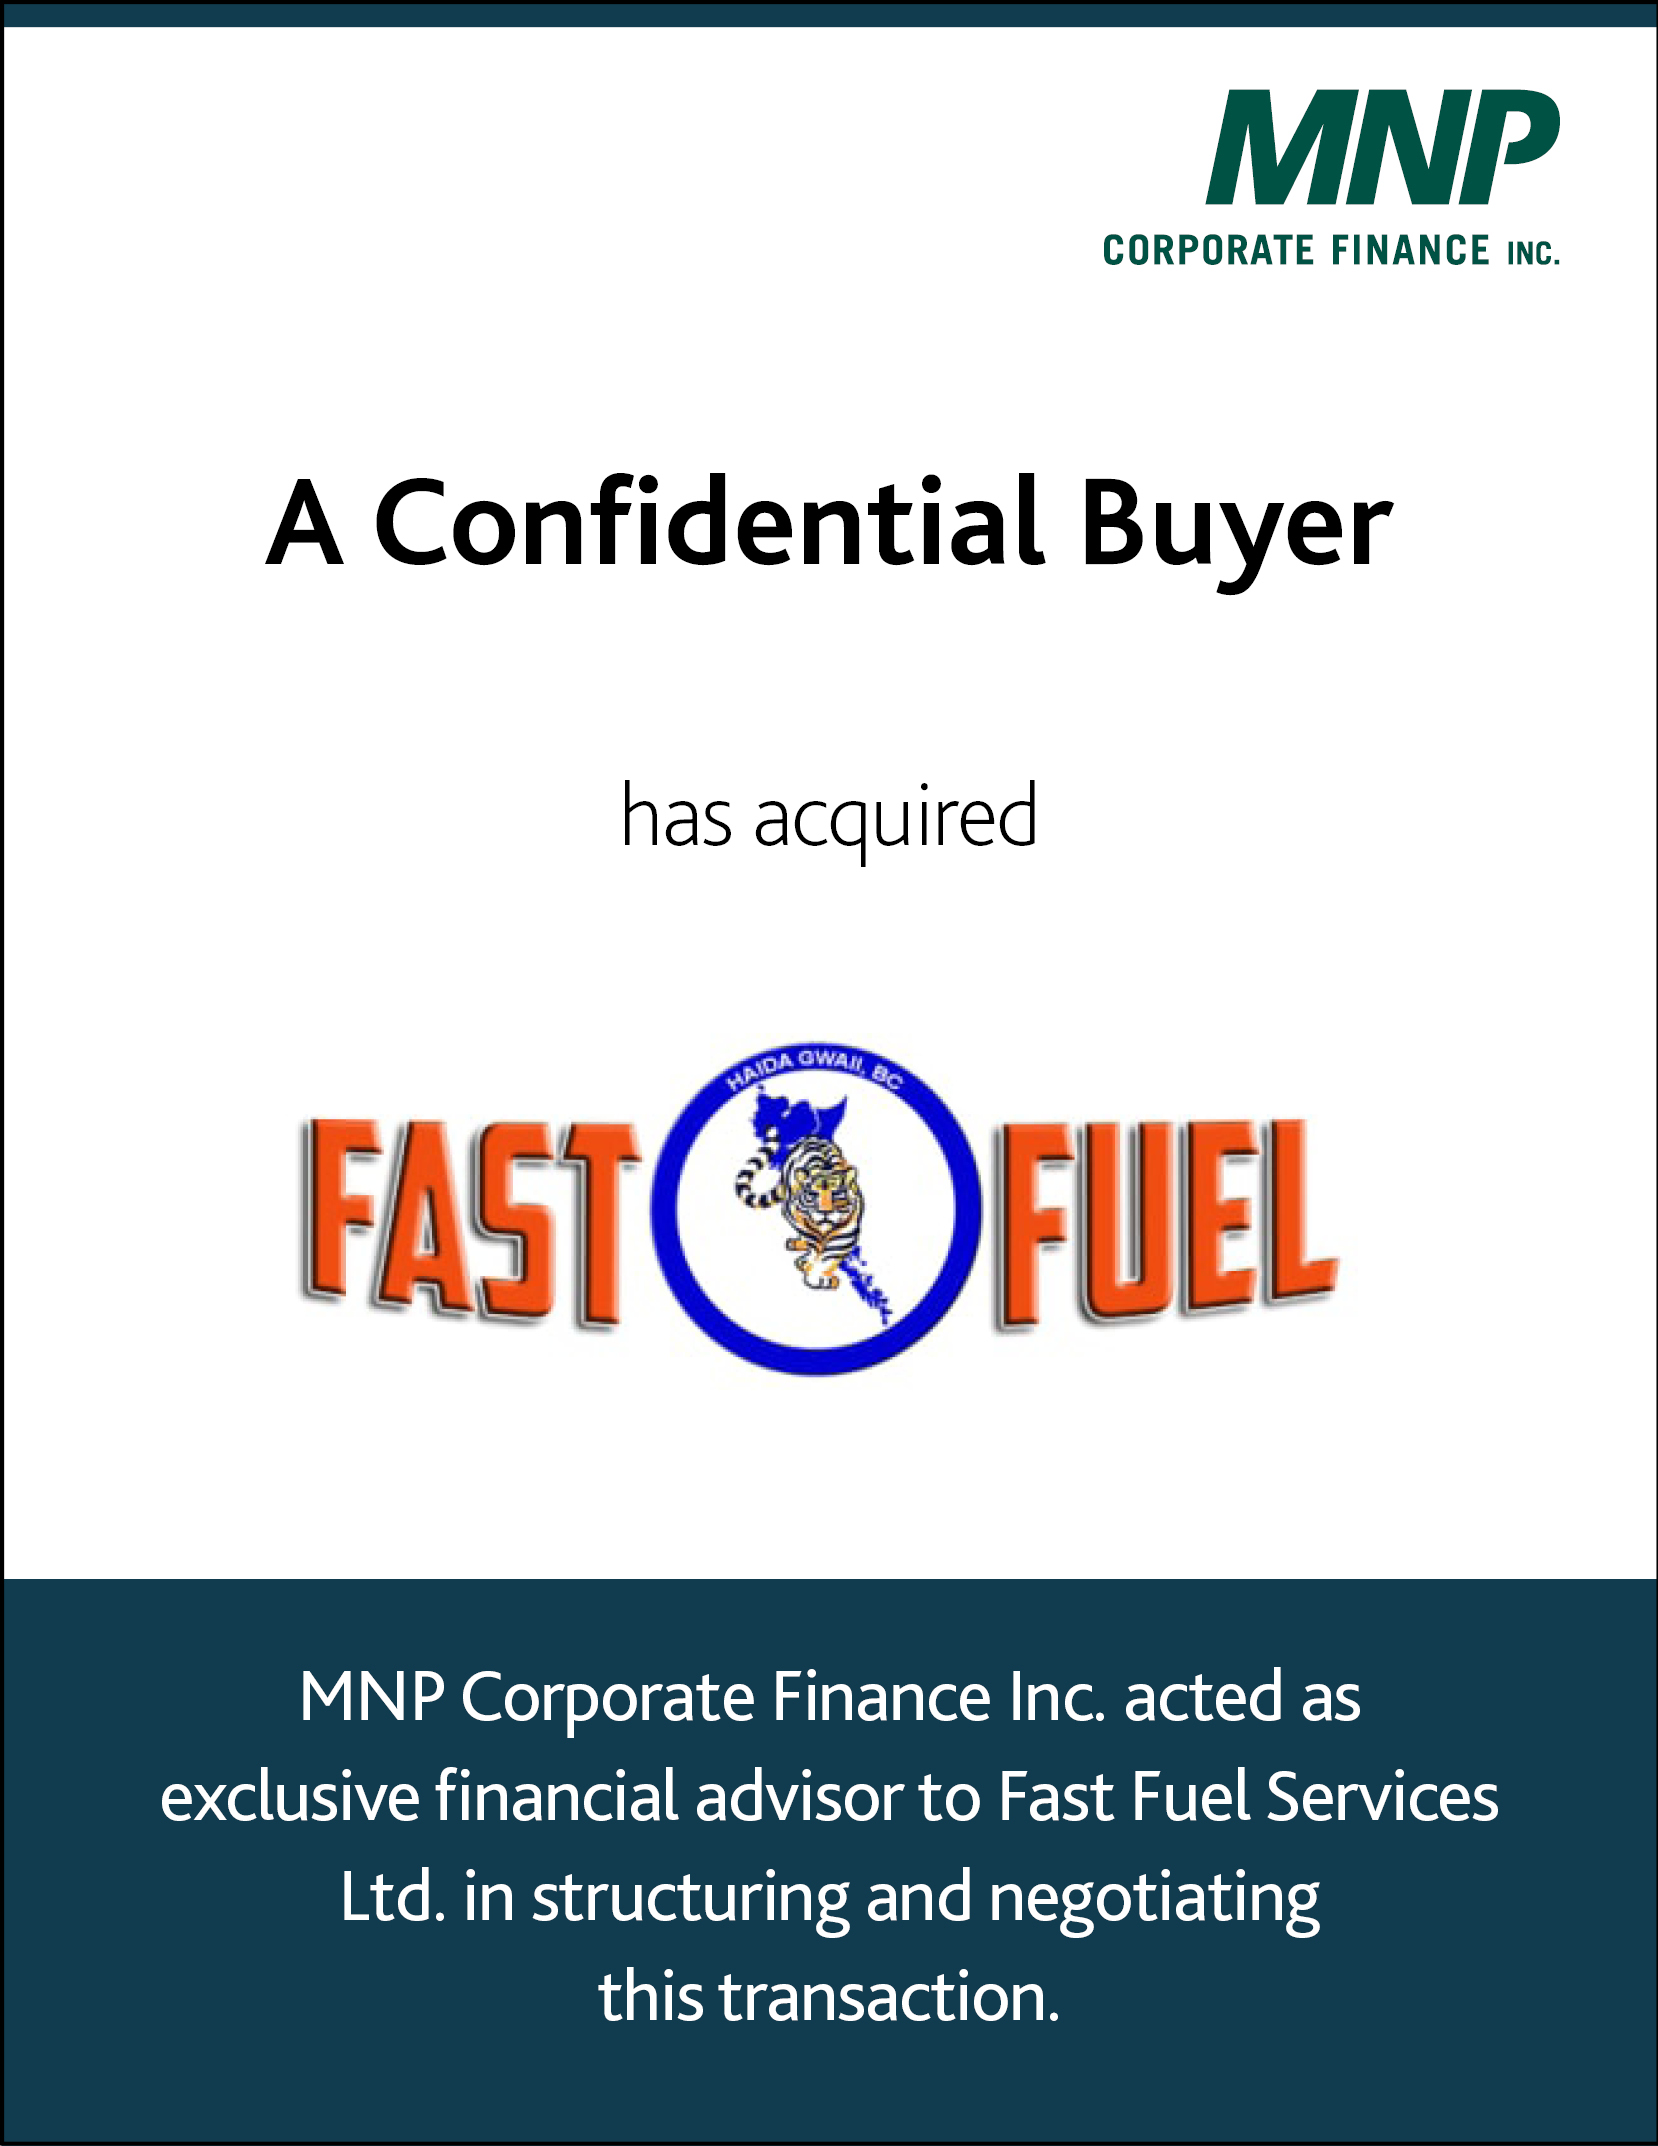 A Confidential Buyer has acquired Fast Fuel 